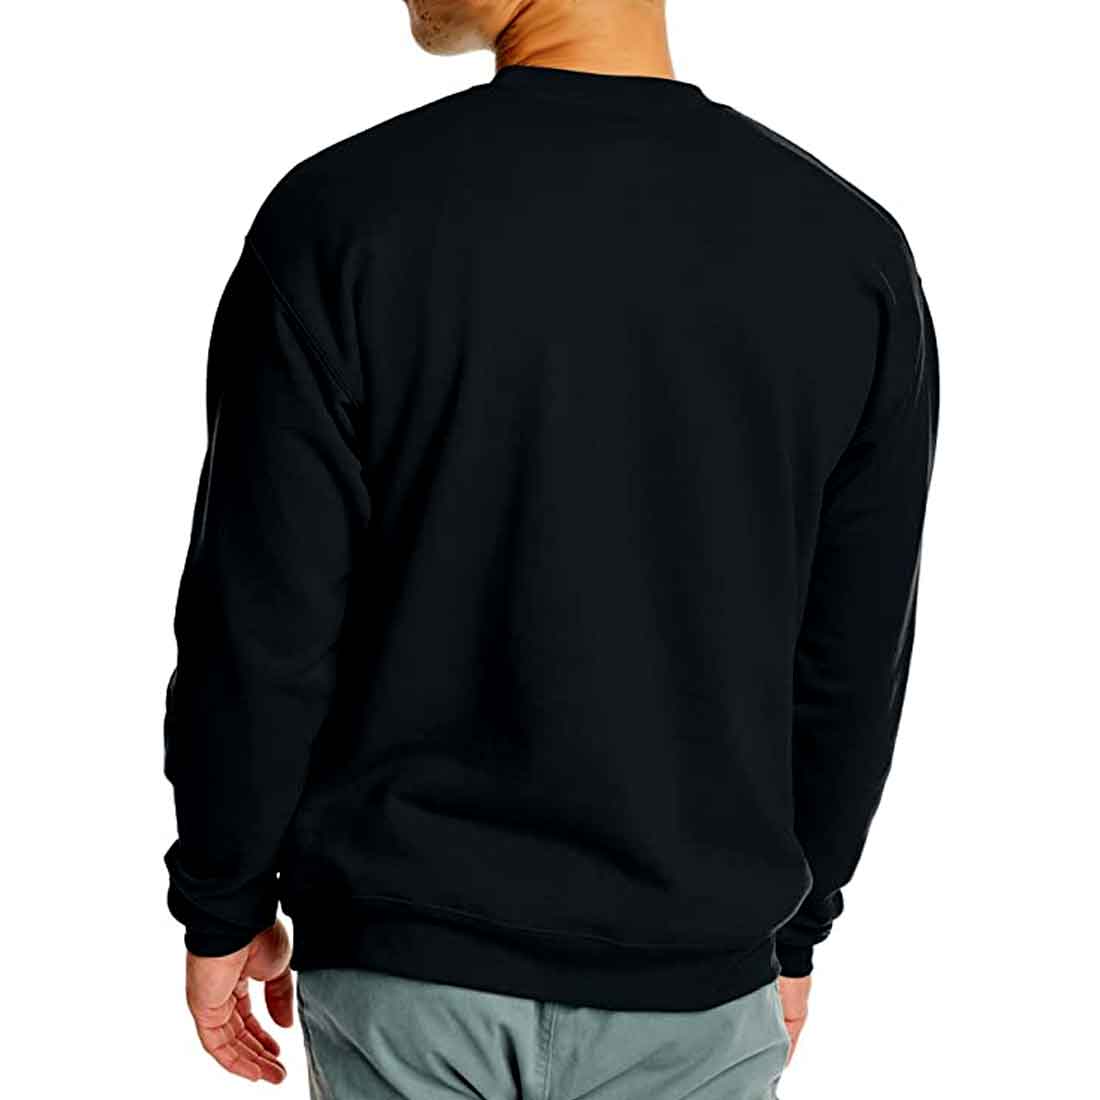 Printed Sweatshirt Mens with Text on Back Print - Dipso